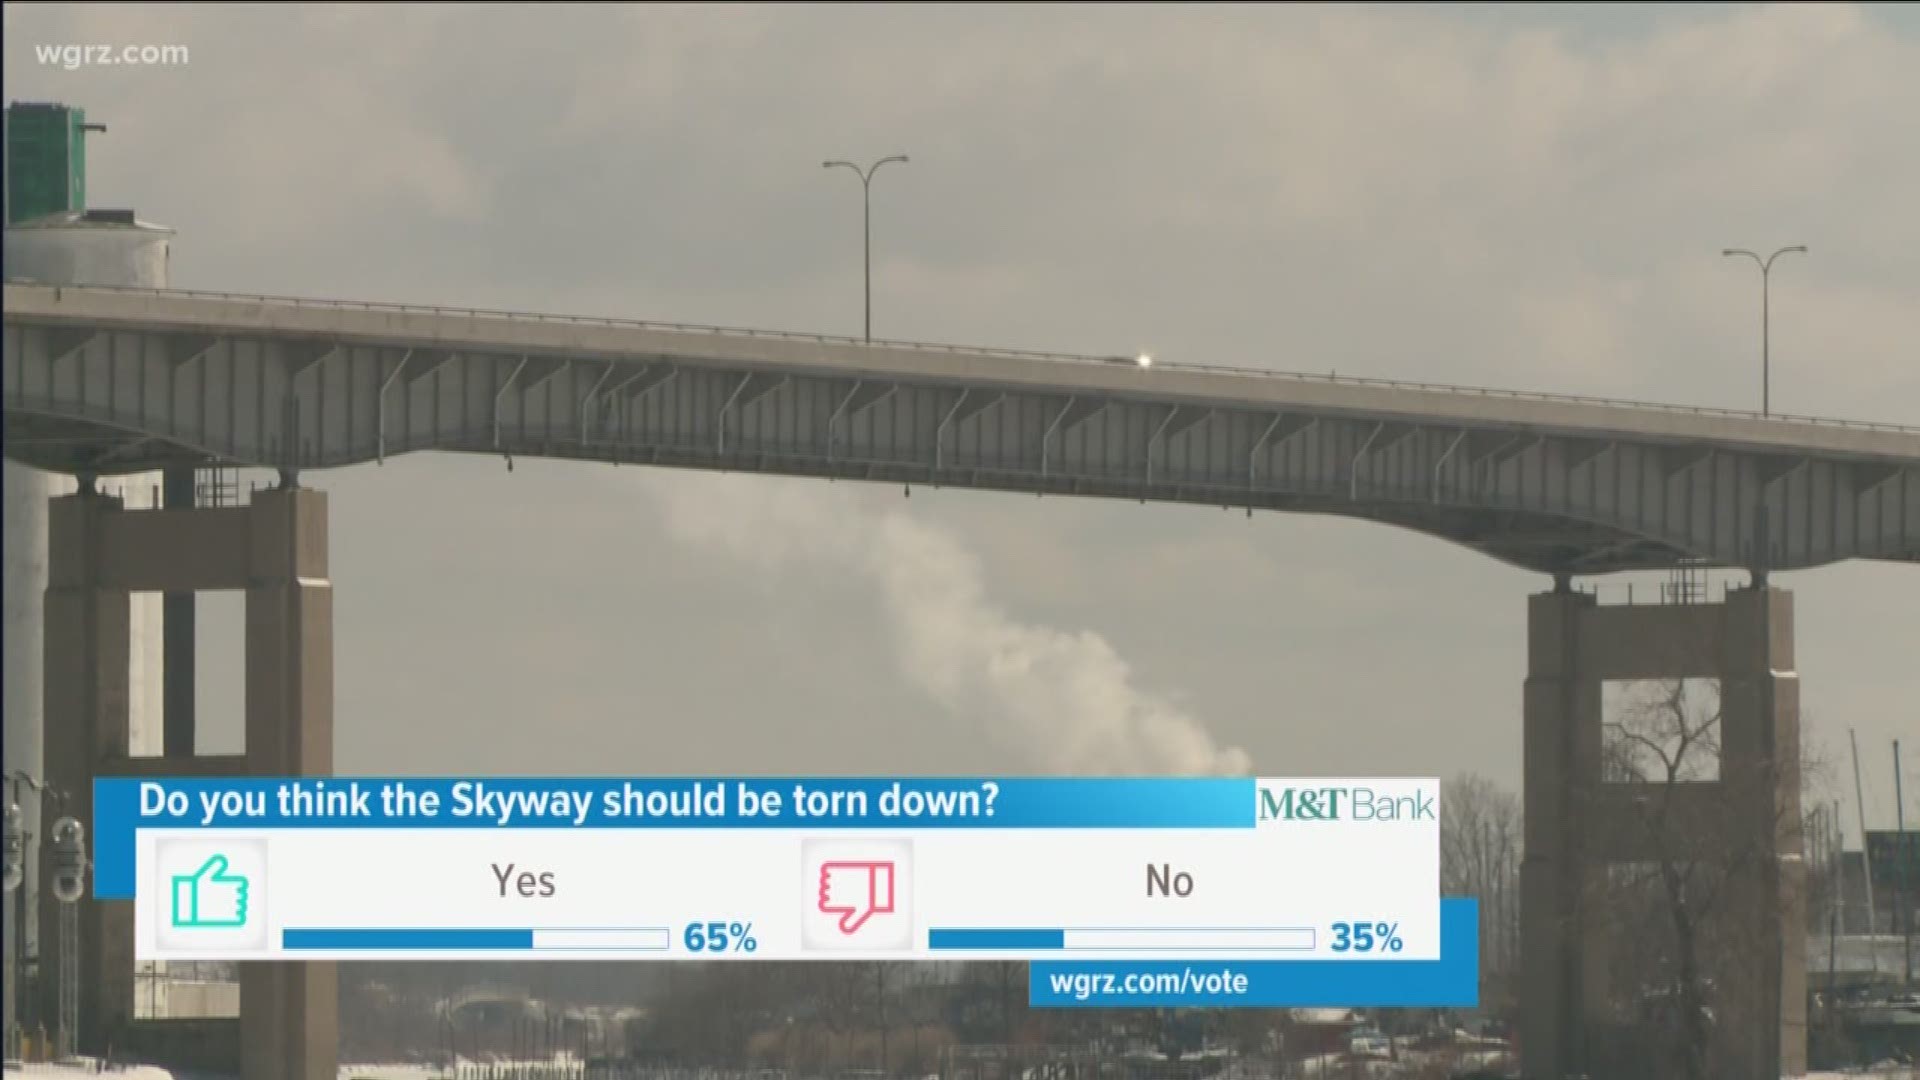 $100k competition to replace Skyway